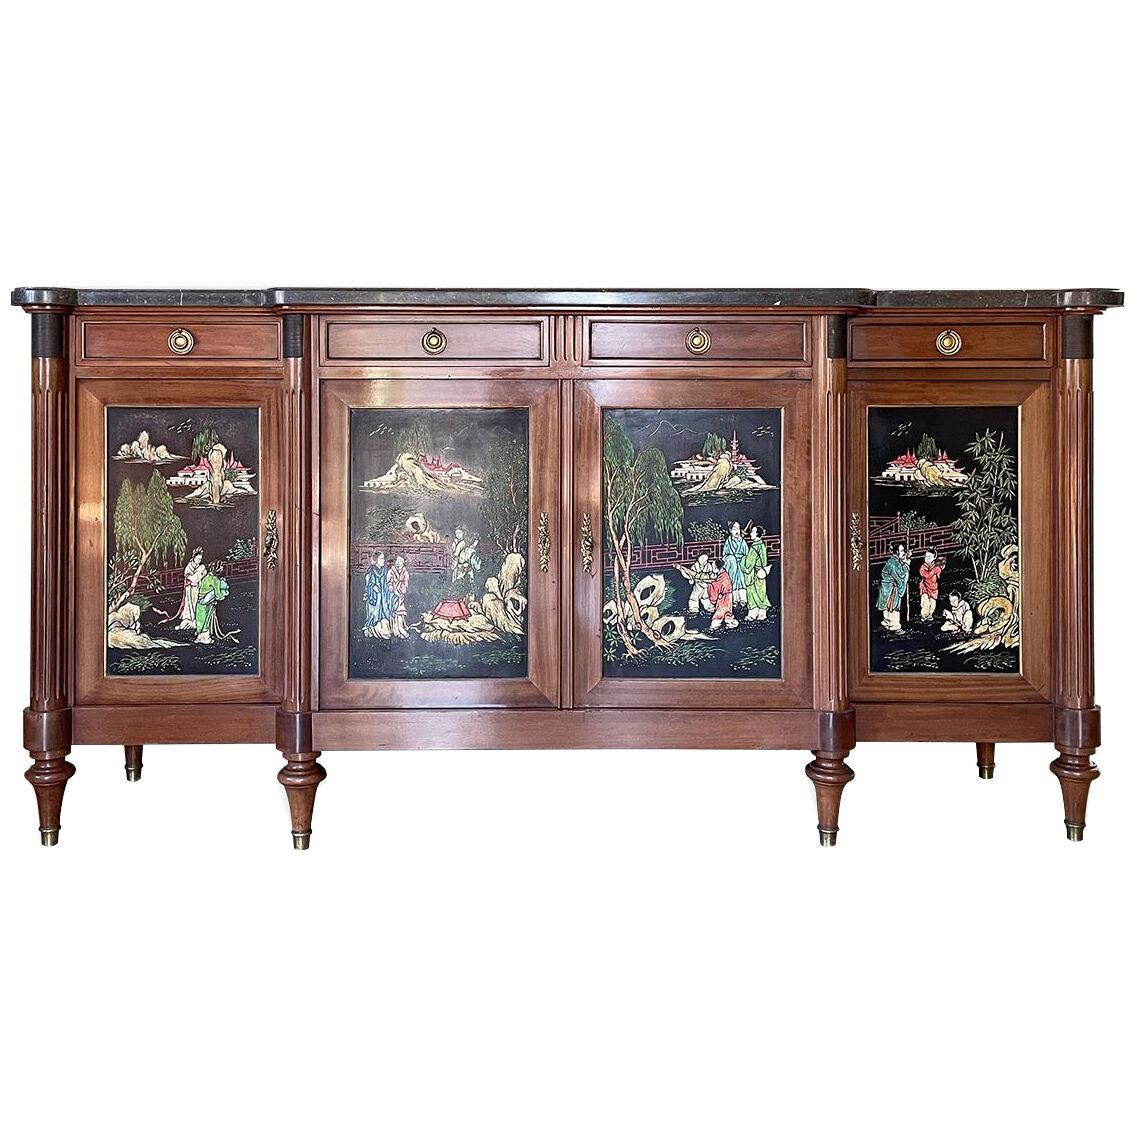 A French Chinoiserie Enfilade in Walnut and Marble